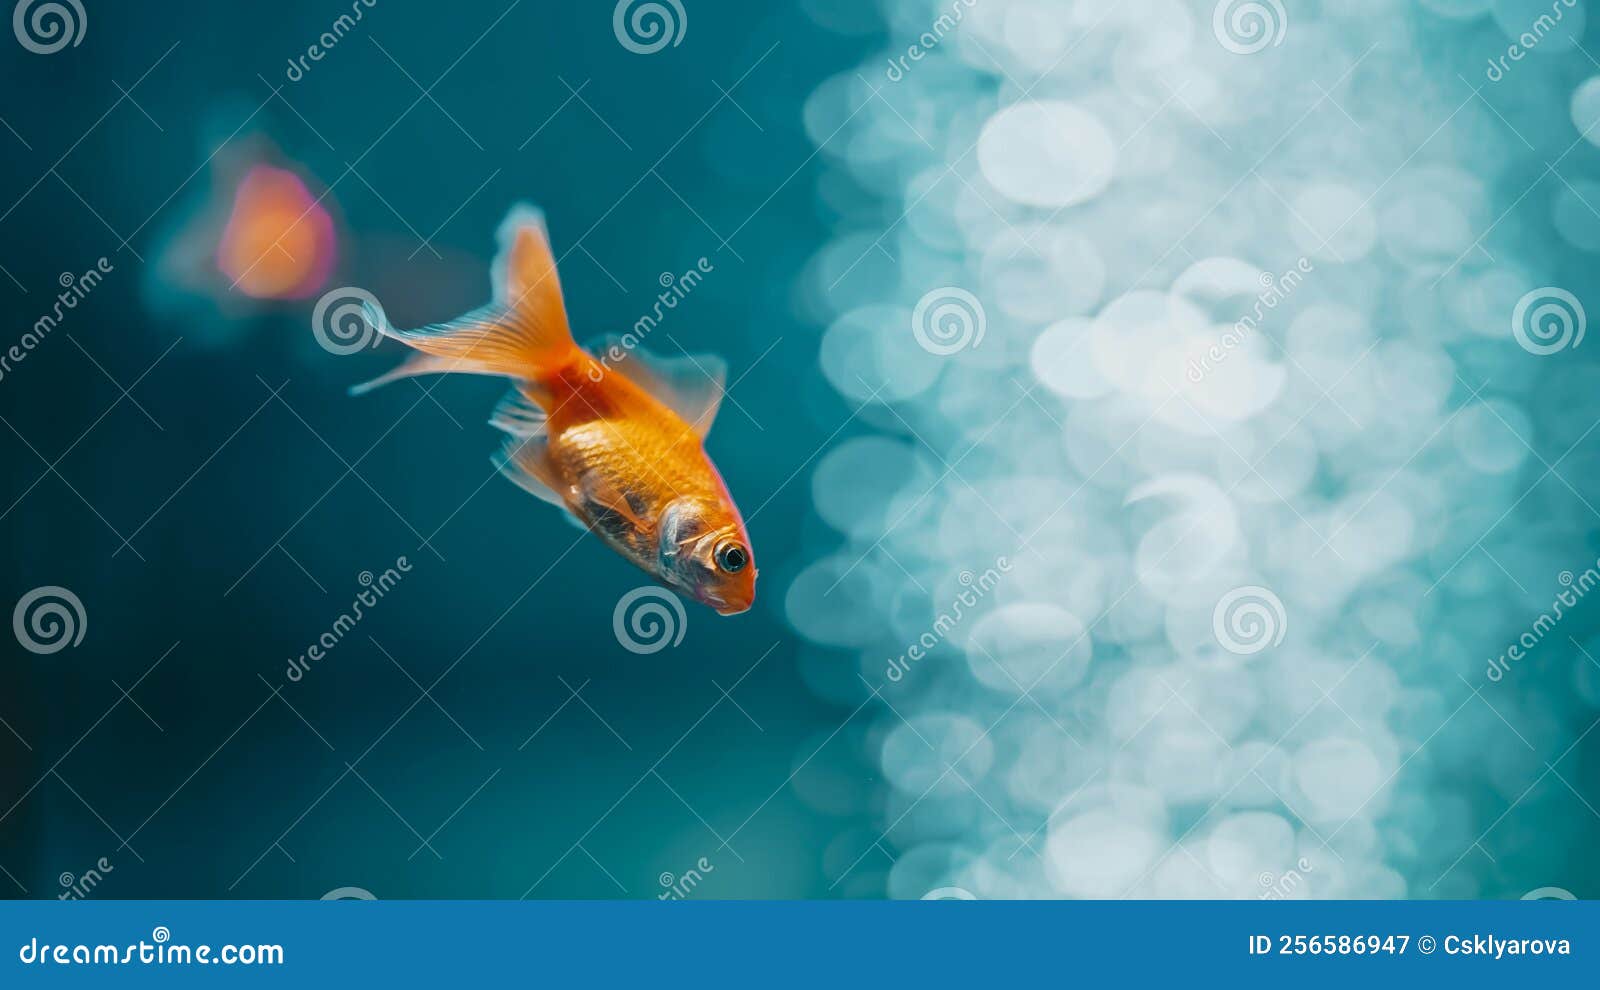 https://thumbs.dreamstime.com/z/goldfish-fins-swimming-aquarium-blue-background-fish-float-water-column-close-up-view-footage-animals-pets-concept-high-256586947.jpg